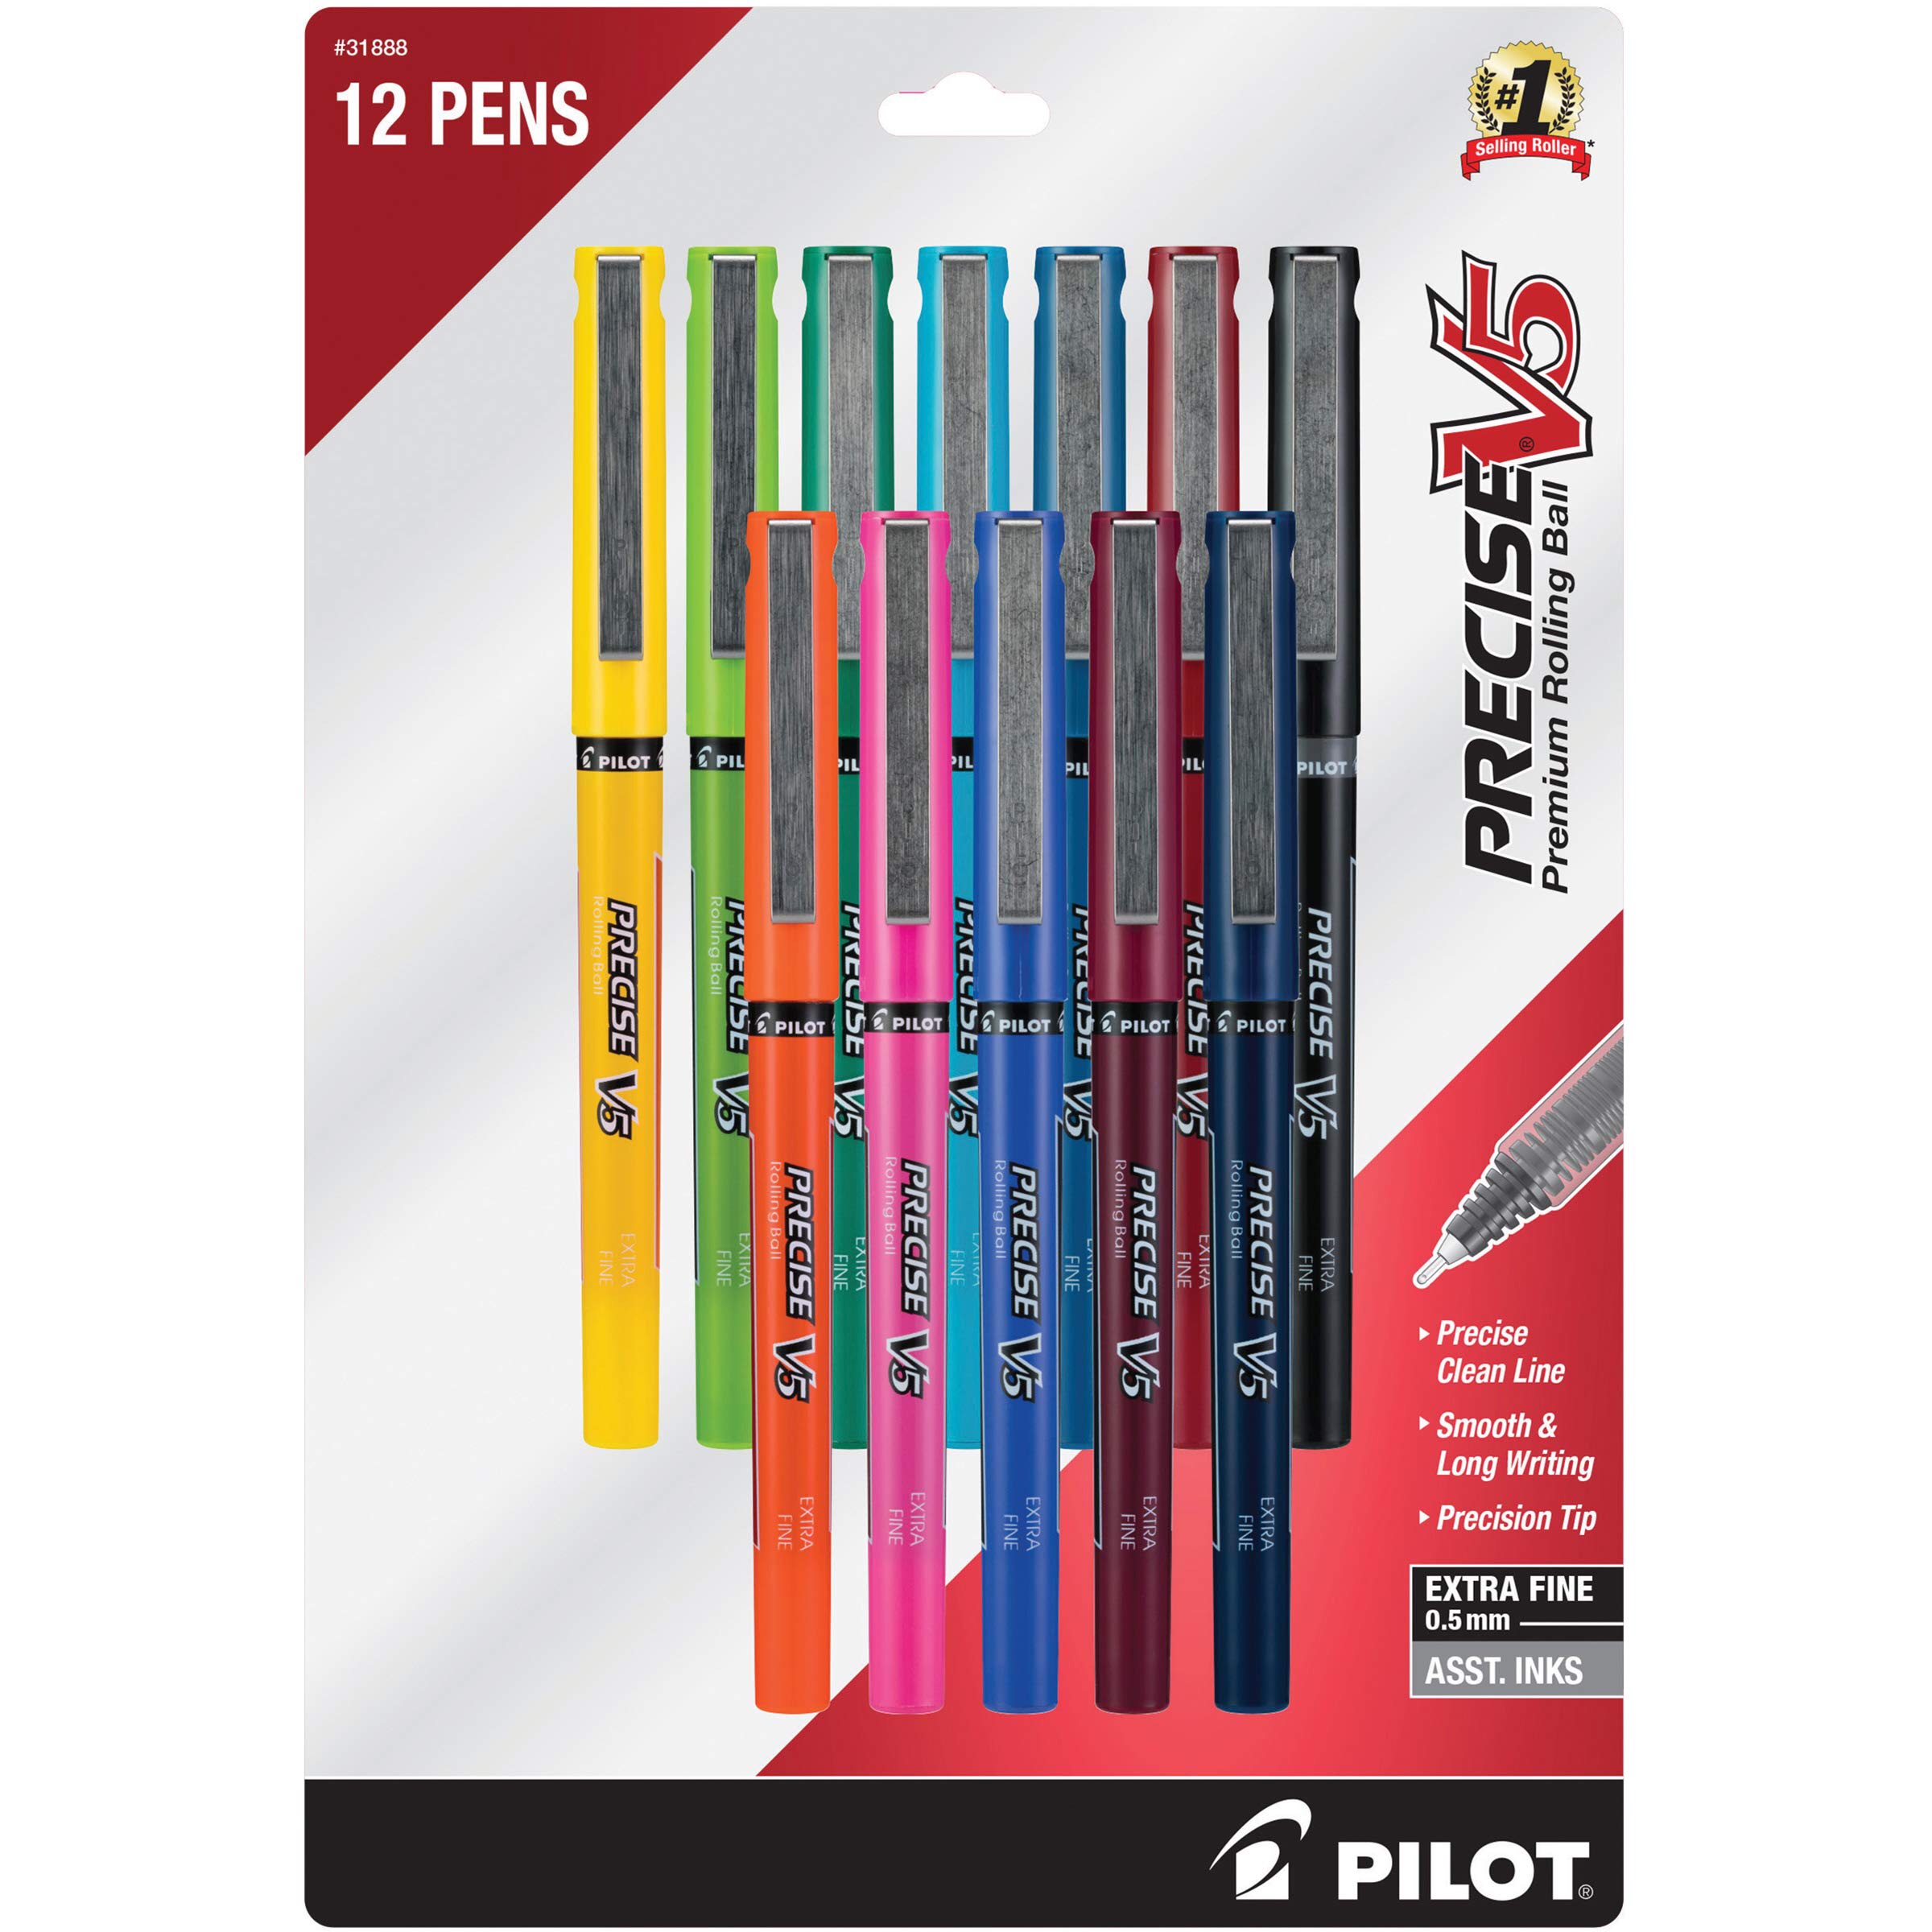 Amazon.com: PILOT Precise V5 Stick Liquid Ink Rolling Ball Stick Pens, Extra Fine Point (0.5mm) Assorted Ink Colors, 12-Pack (31888) 液态墨水滚动式圆珠笔12色